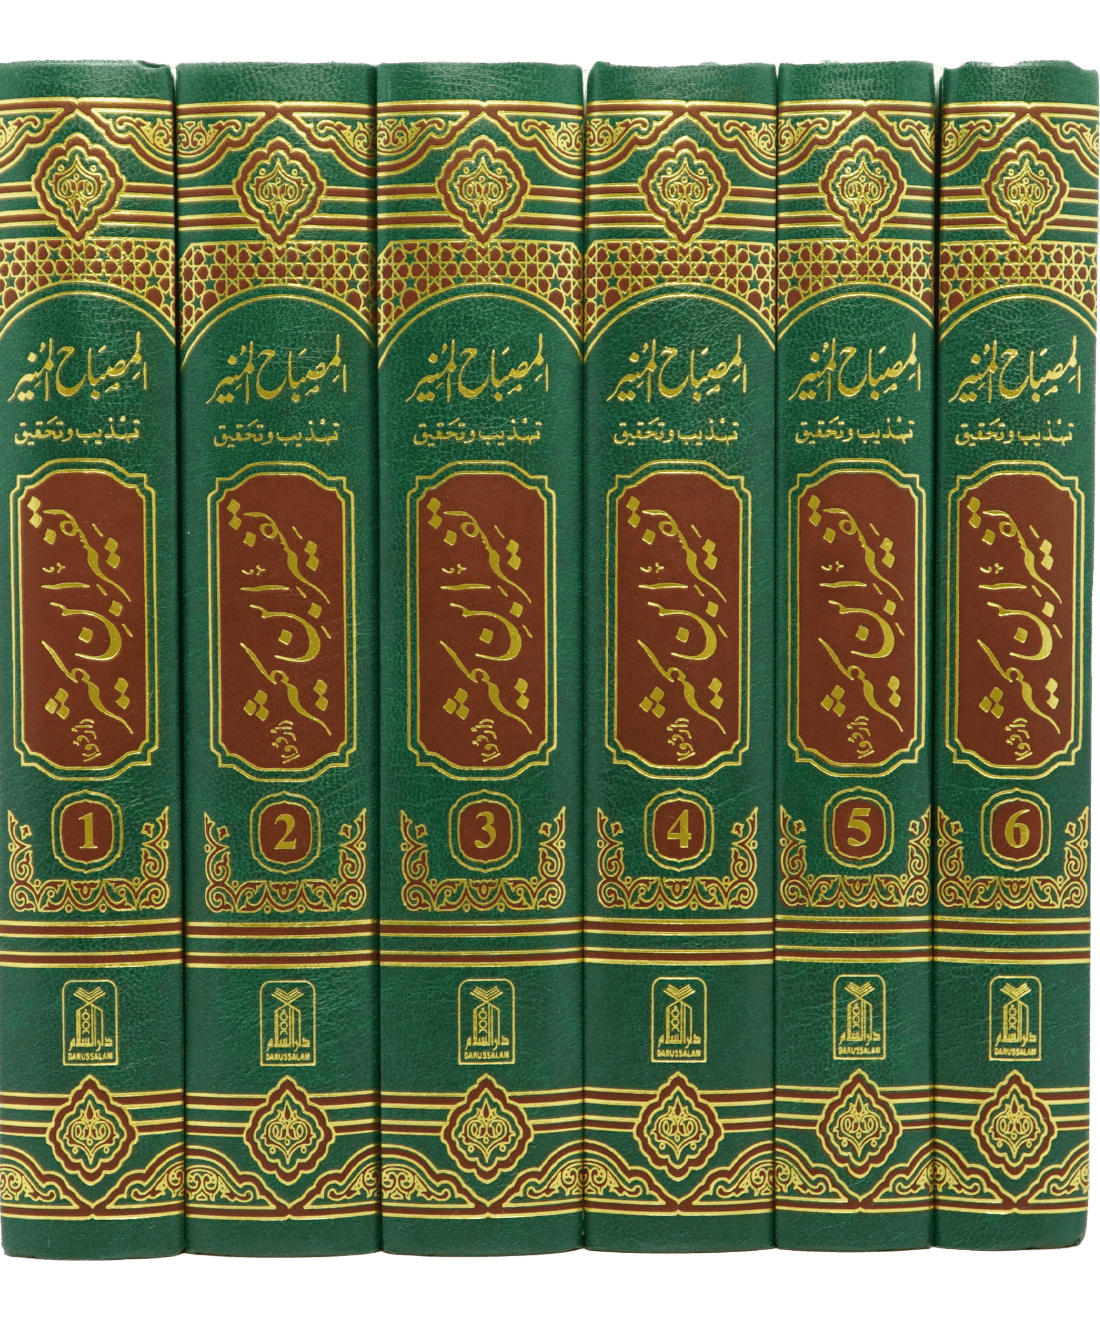 tafseer ibn e kaseer (6 volumes complete) published by darussalam.